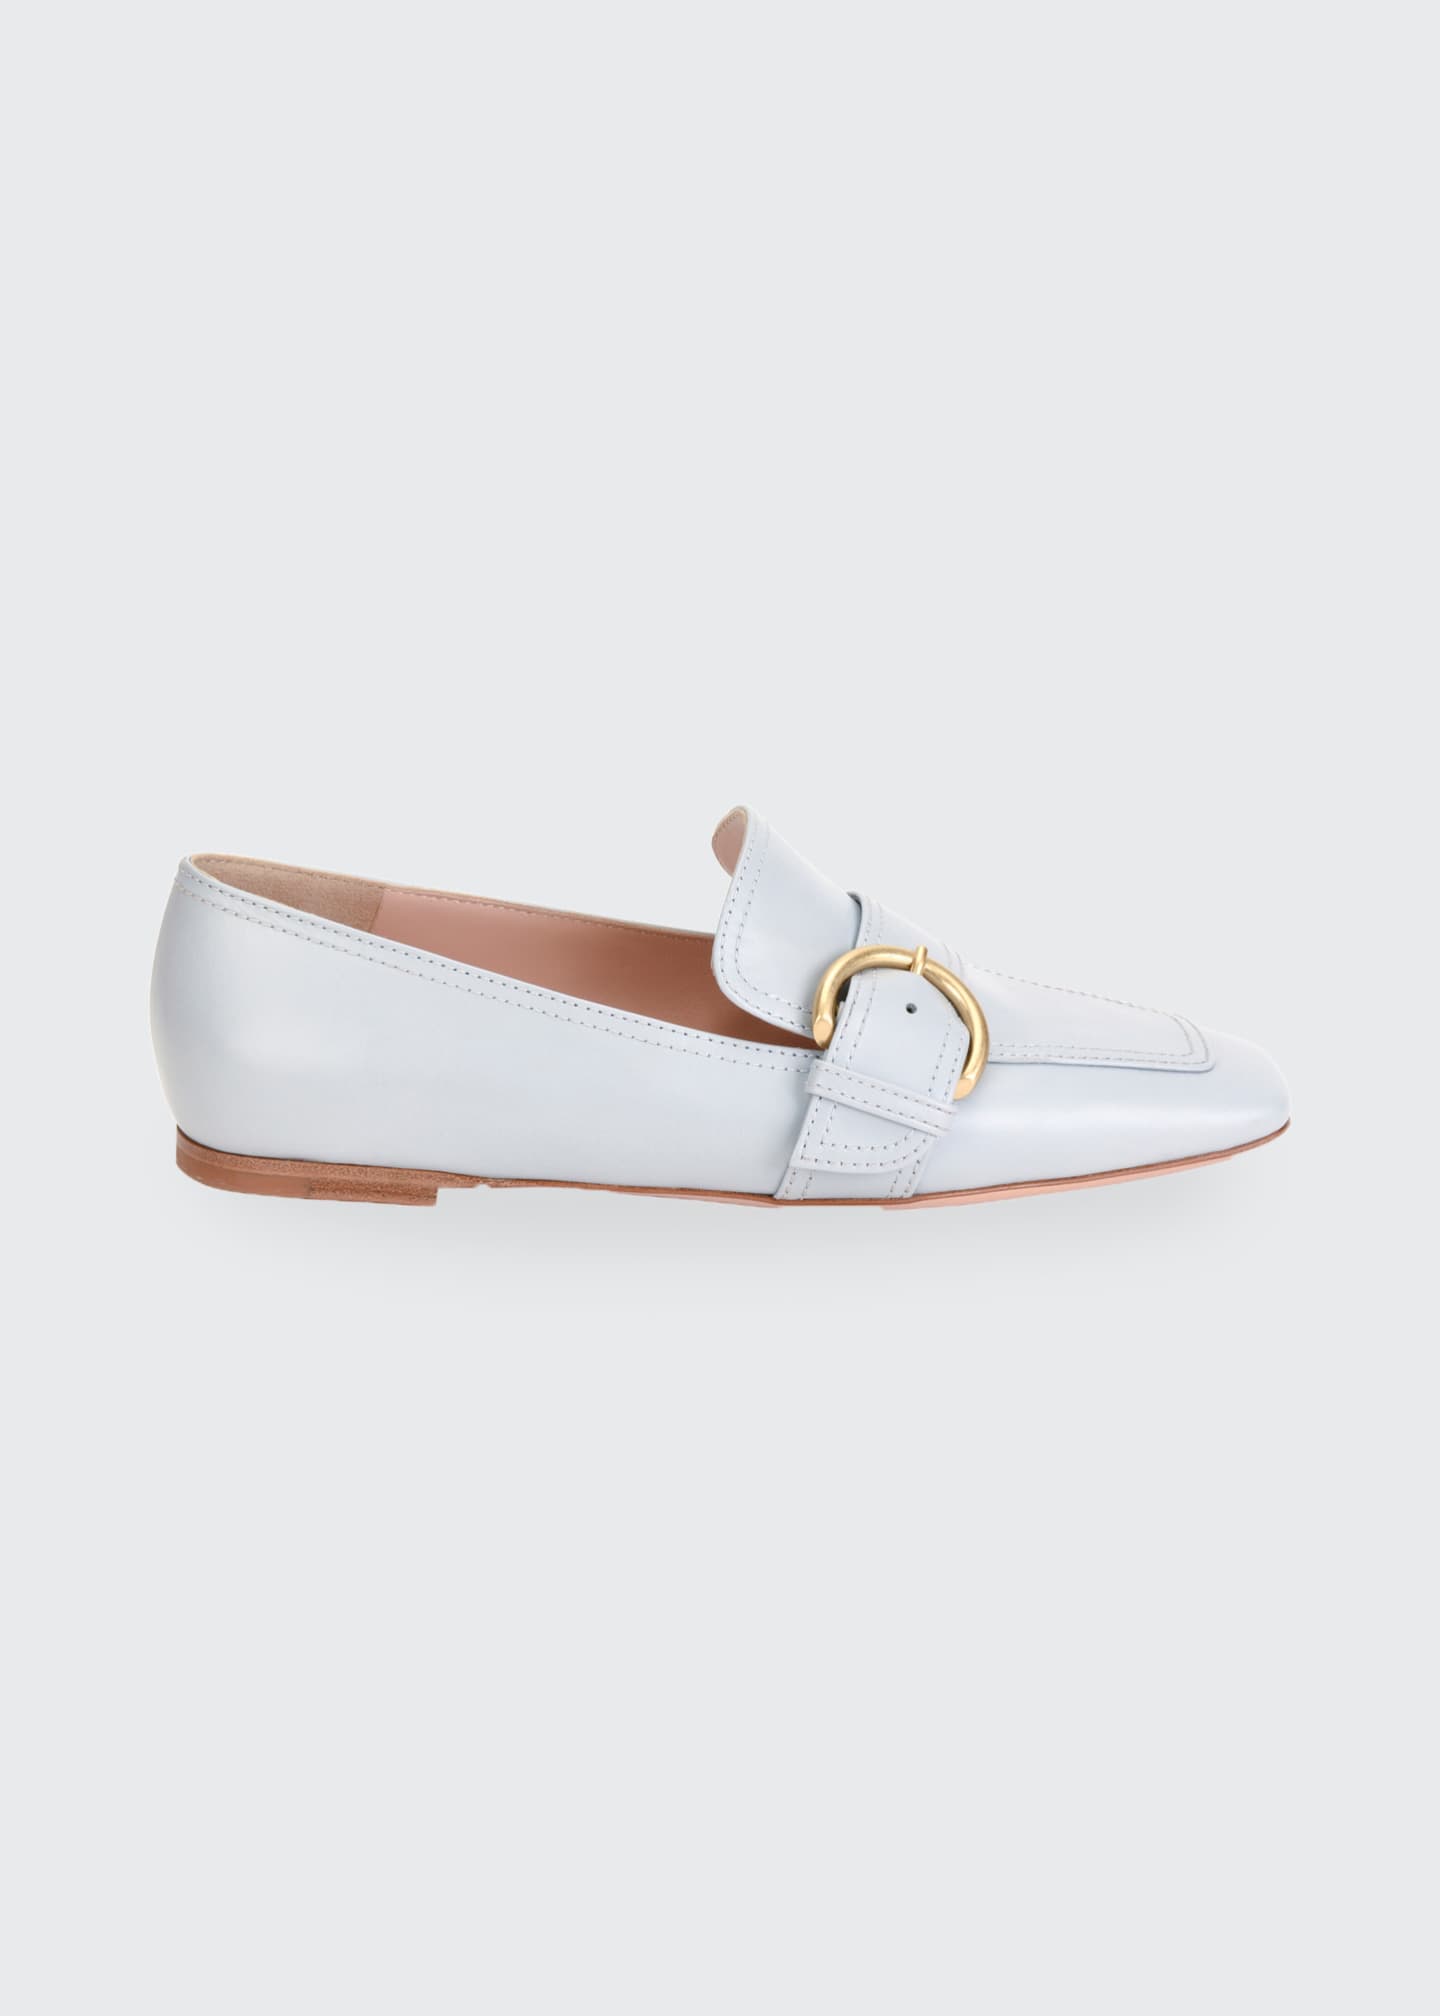 Gianvito Rossi 5mm Flat Square-Toe Leather Loafers